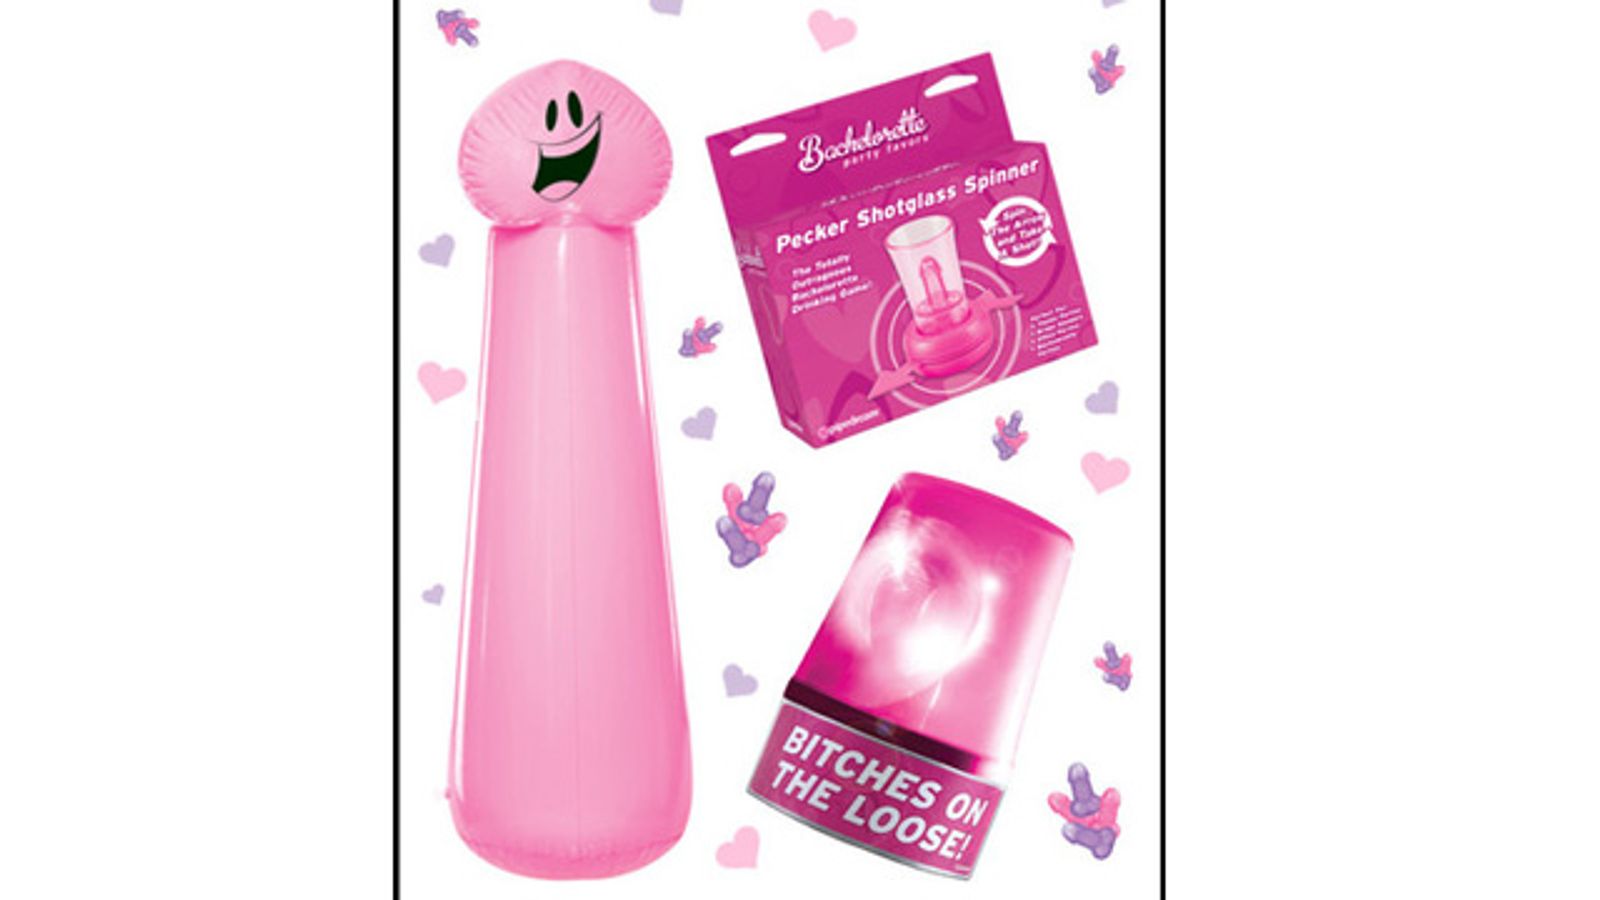 Pipedream Products Ready To Make 'Em Laugh with 10 New Bachelorette Party Favors